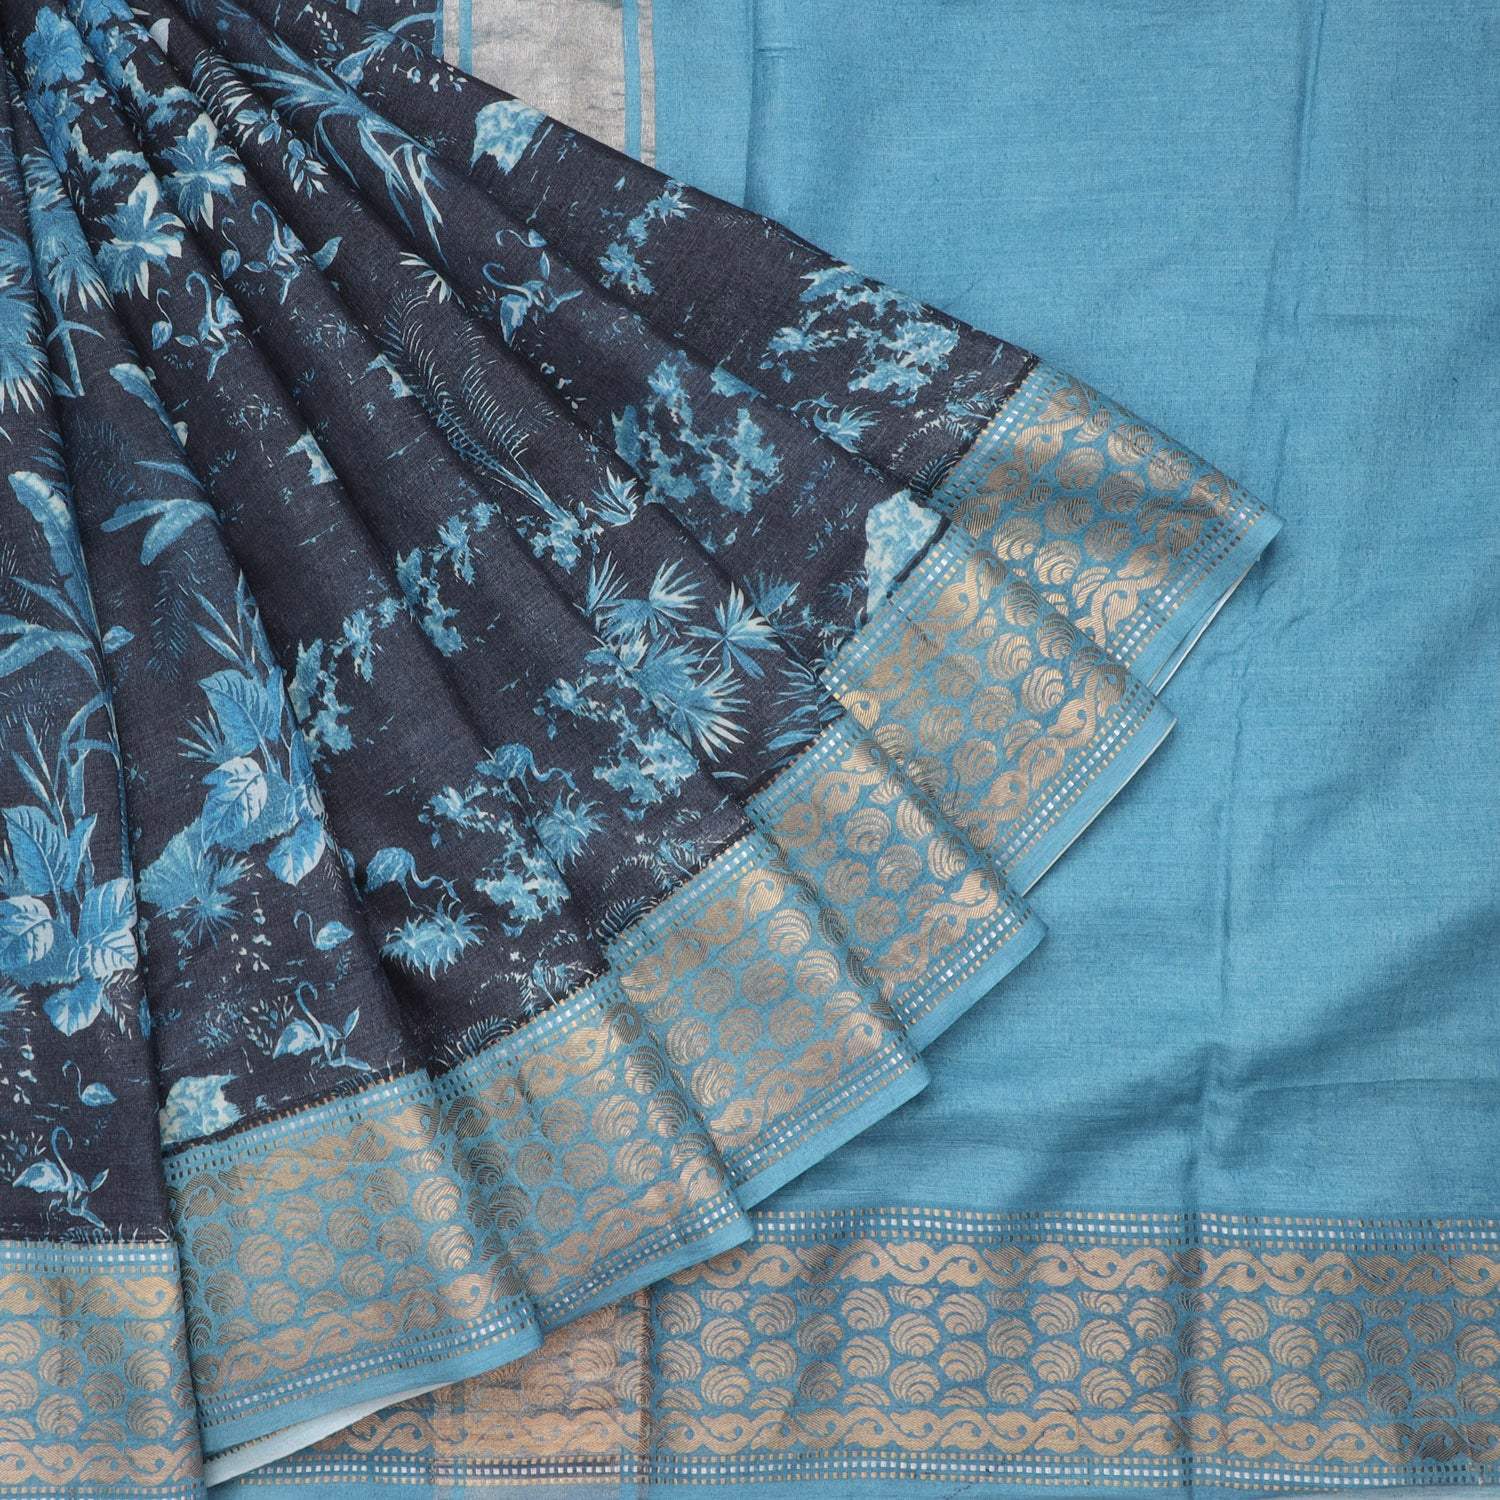 Black Cotton Saree With Floral Printed Motifs - Singhania's